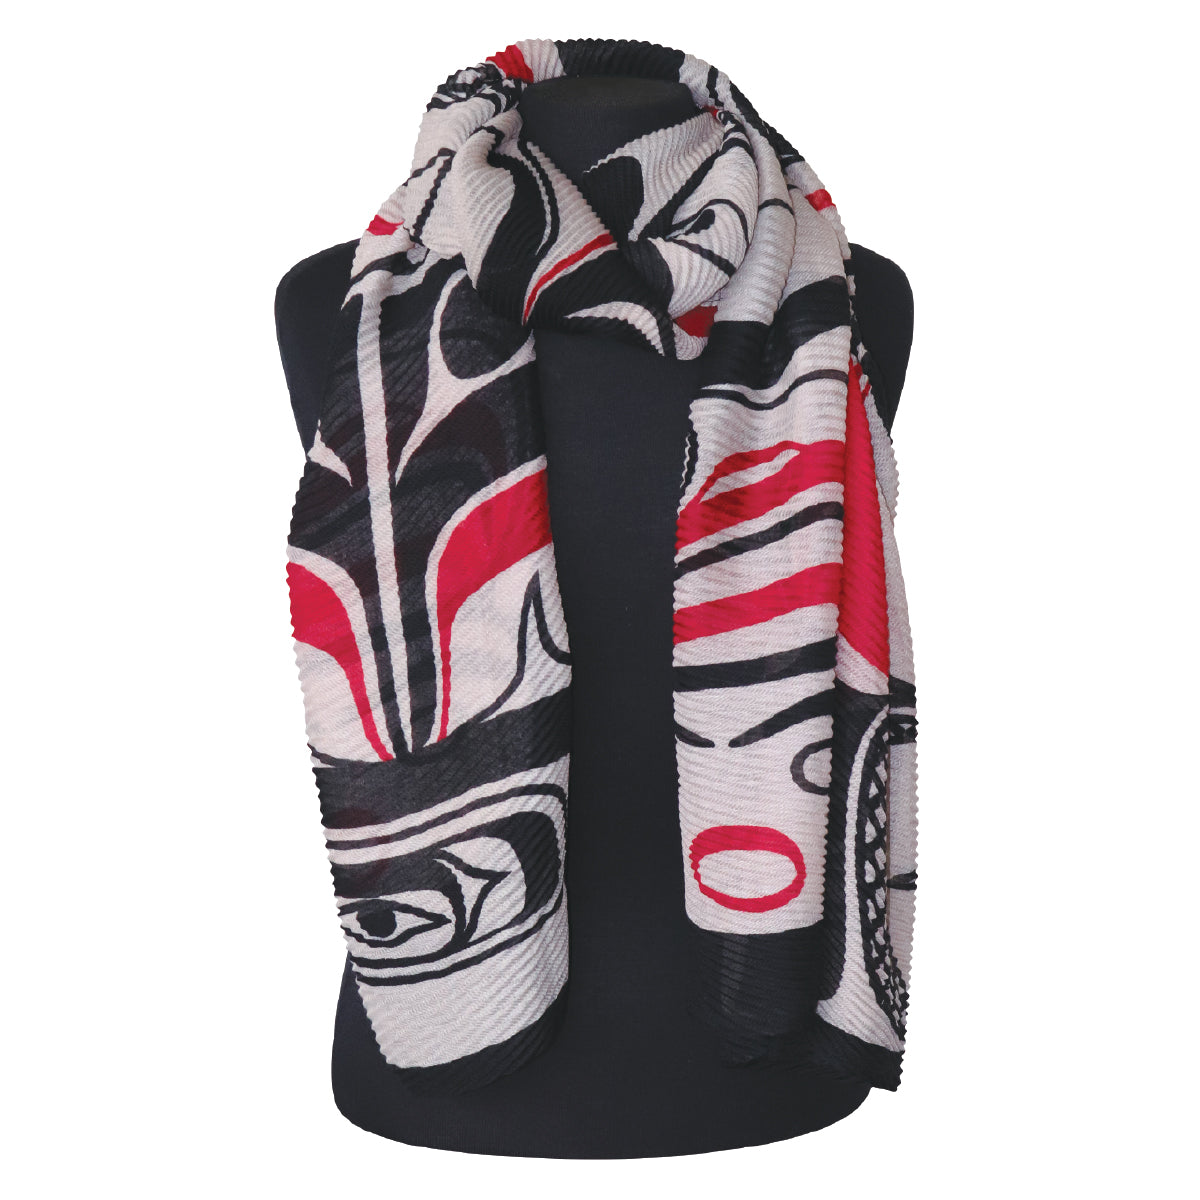 ECO SCARFS - Eagle Vision - ESCARF19 - House of Himwitsa Native Art Gallery and Gifts